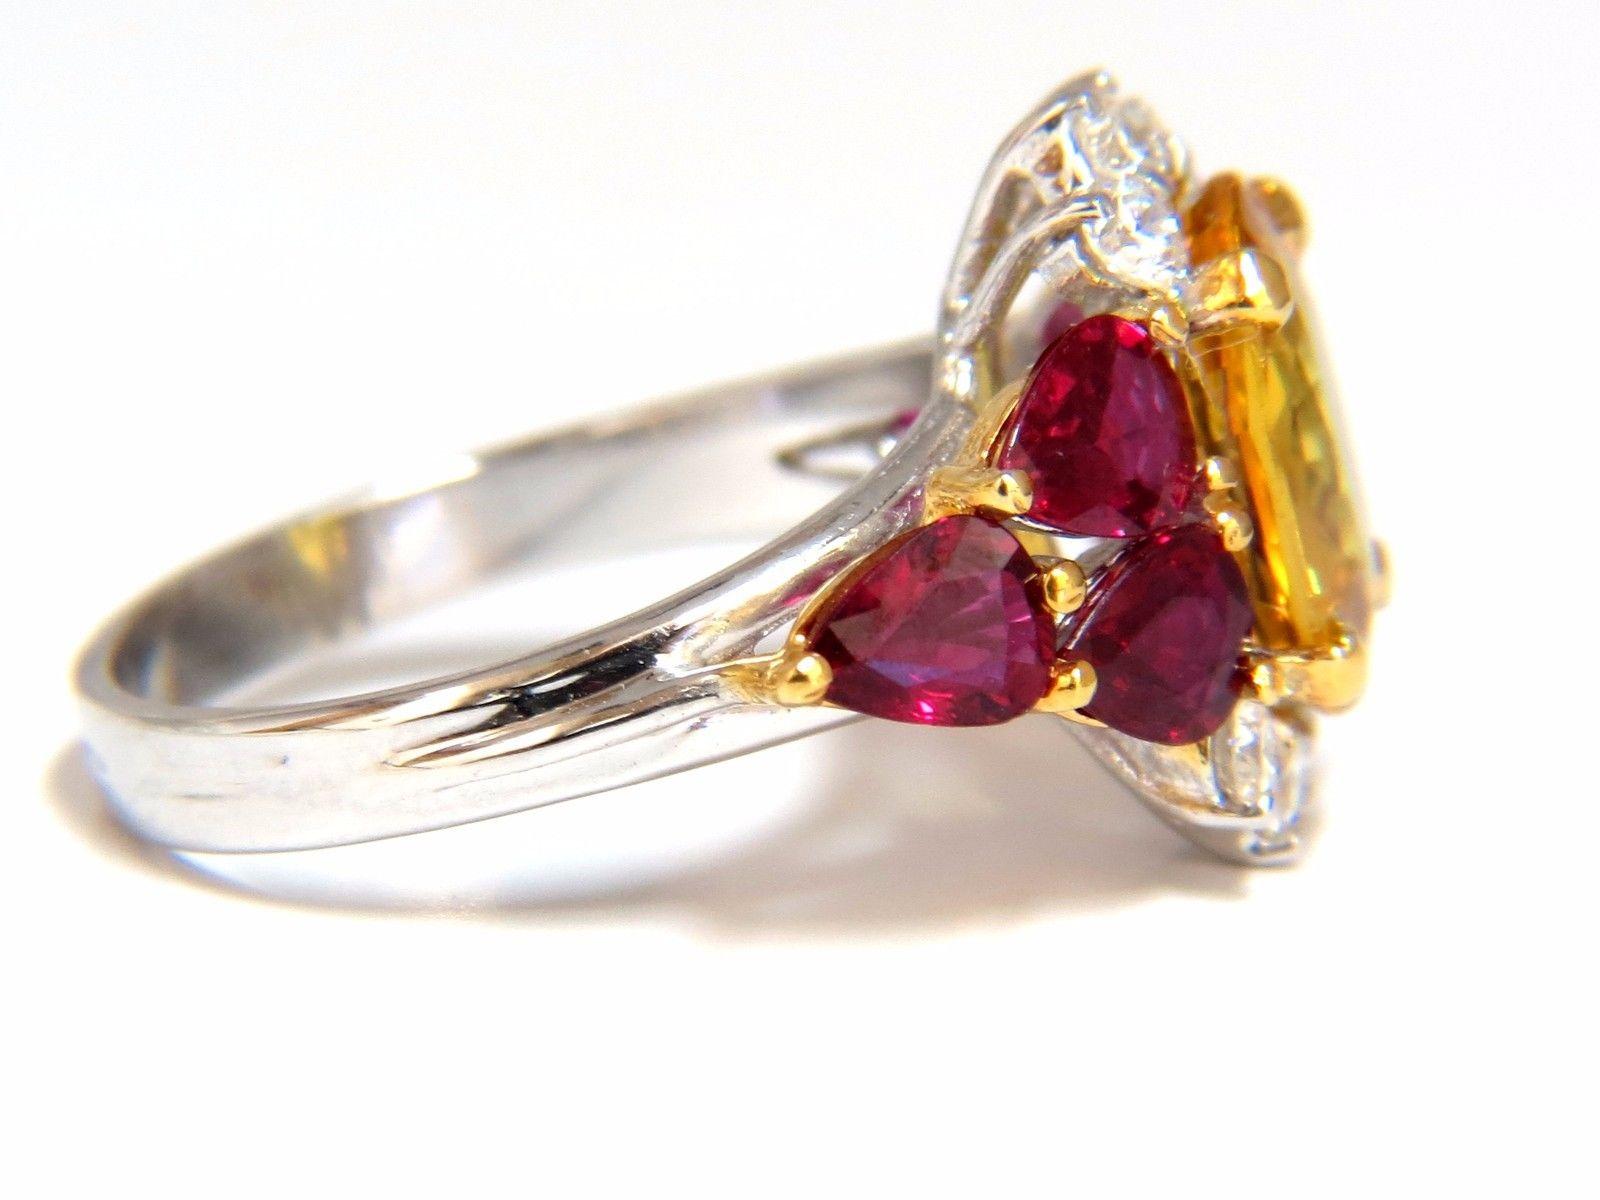 Natural Ruby & Yellow Sapphire diamonds ring.

3.00ct. Natural yellow Sapphire

10.2 X 7.6mm 

Full cut oval brilliant 

Clean Clarity & Transparent

Prime Vivid Yellow



1.88ct natural (6) ruby pear shapes on sides

Clean clarity &